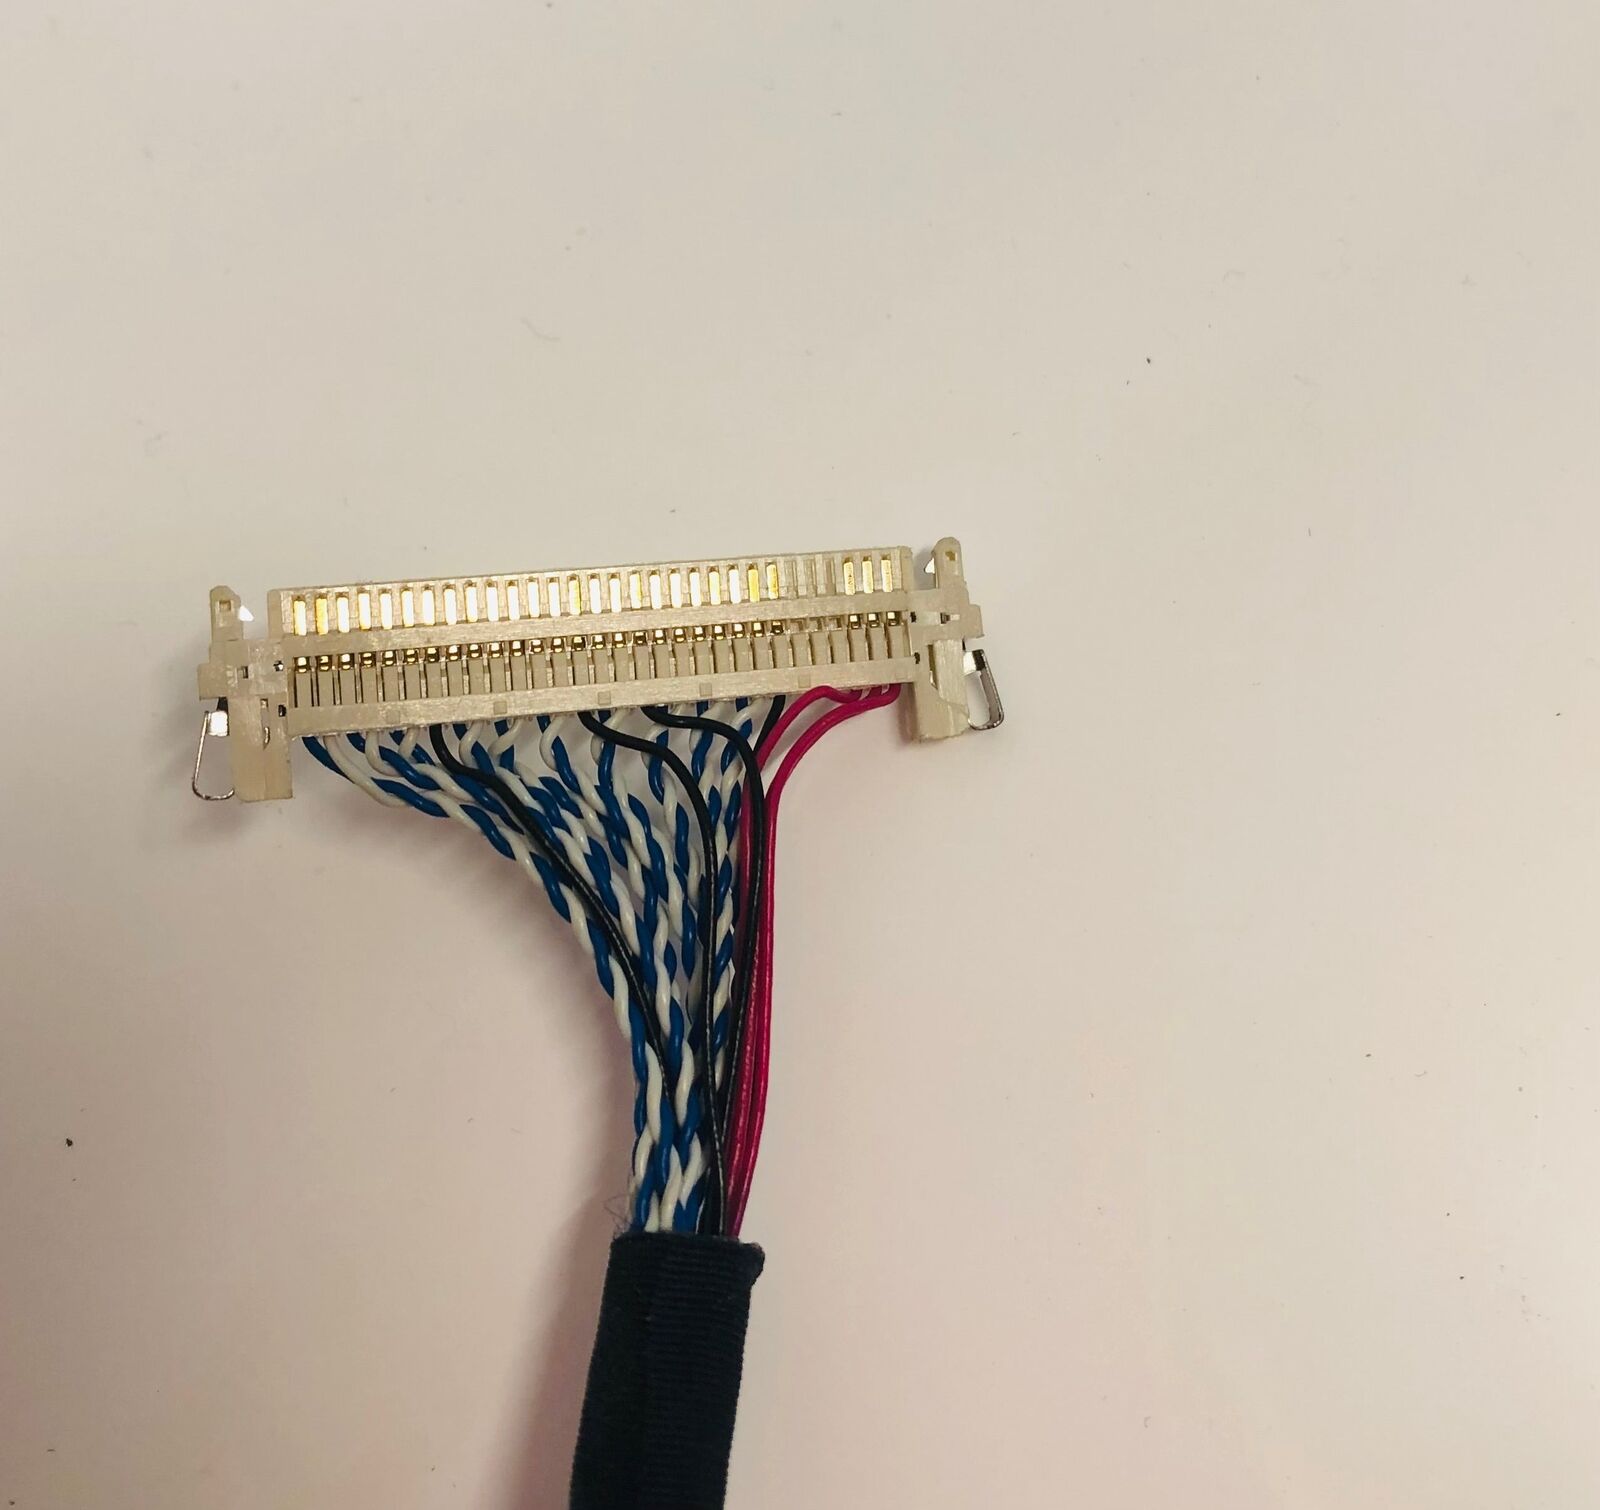 TECHNIKA LCD230R - LVDS CABLE